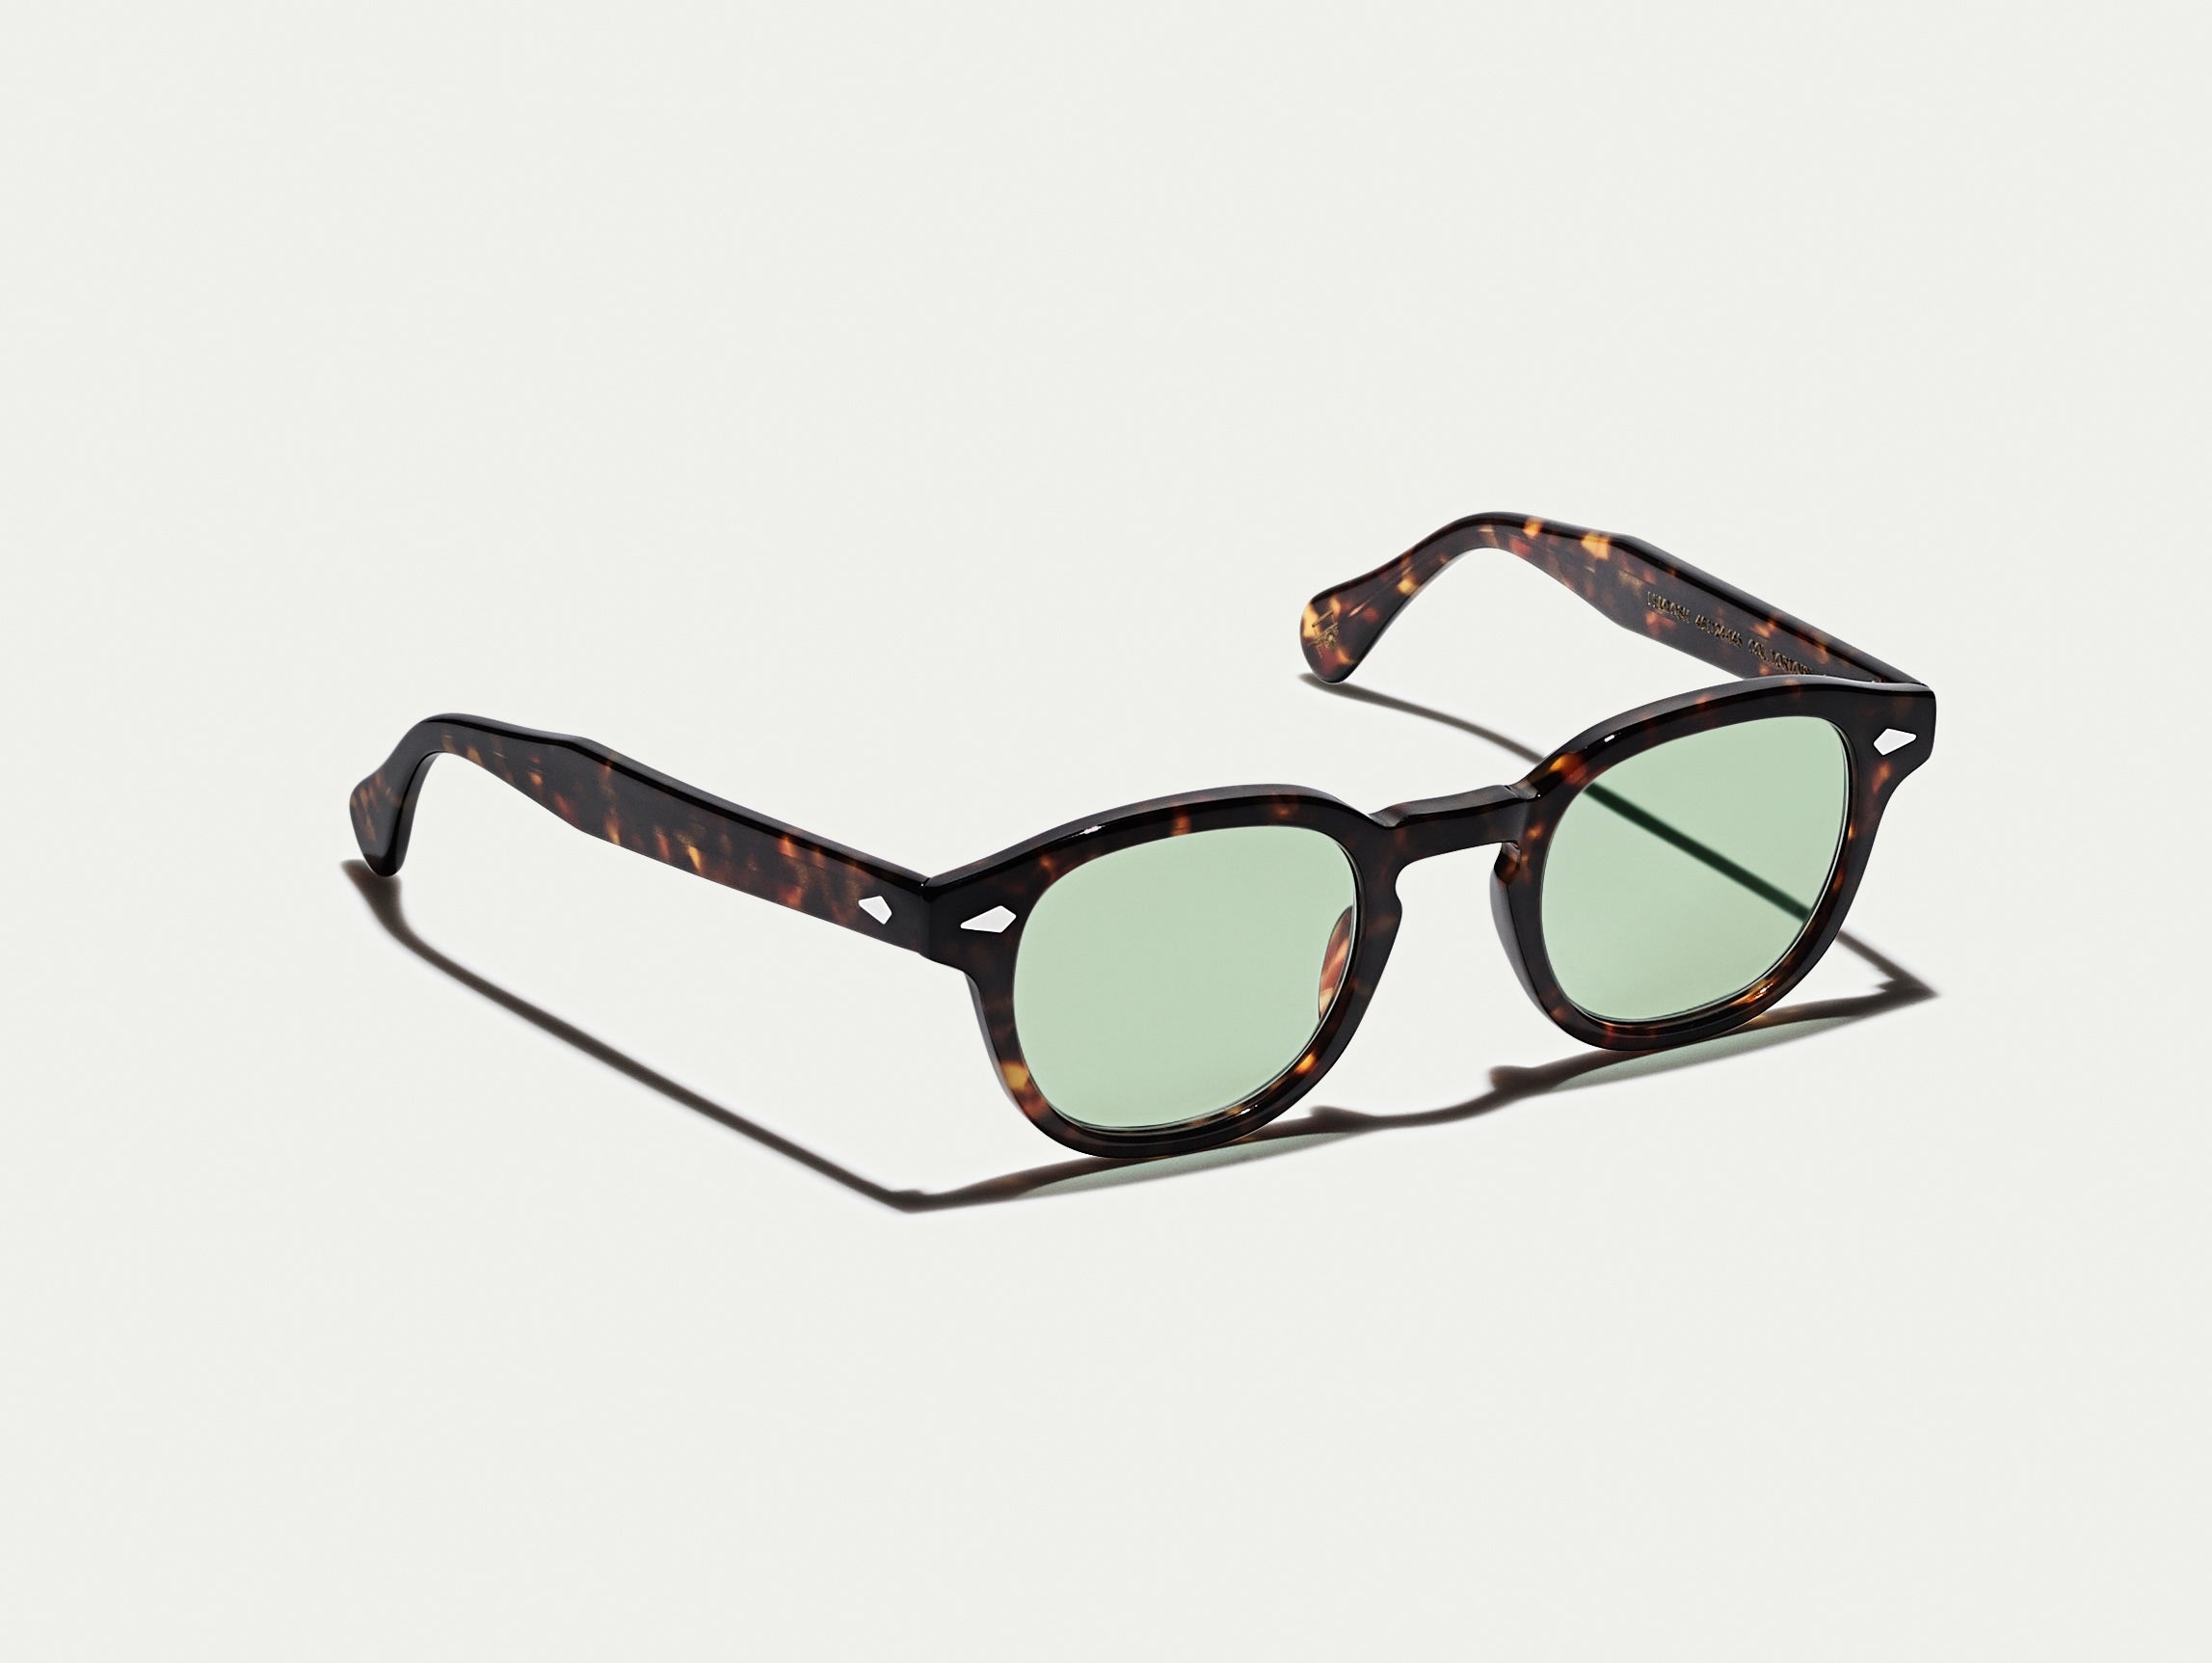 The LEMTOSH Tortoise with Limelight Tinted Lenses